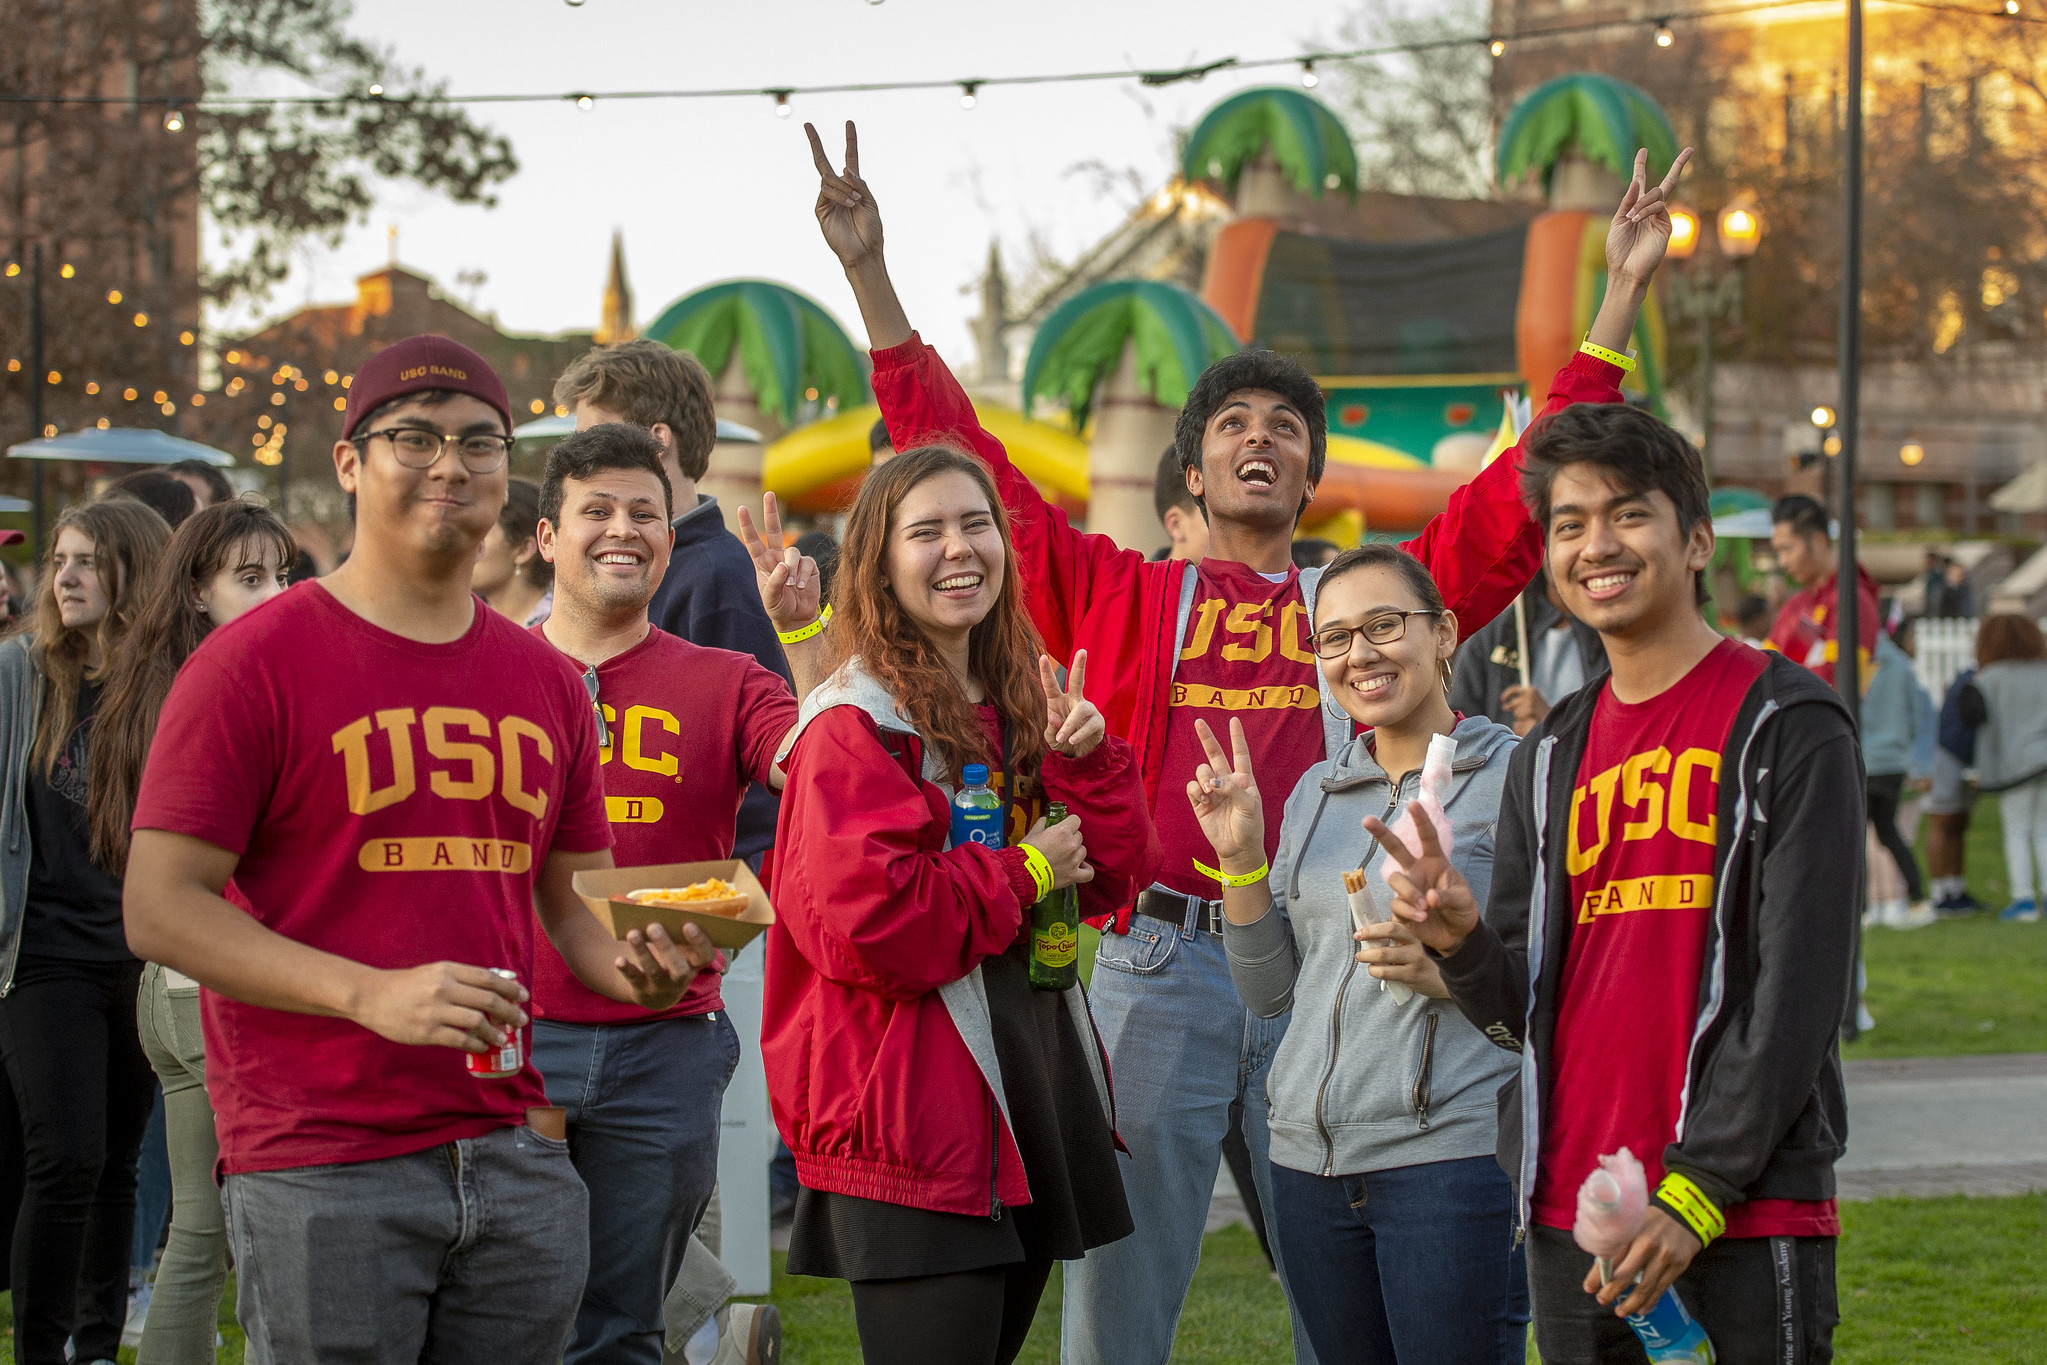 Six students in USC shirts throwing USC victory symbol